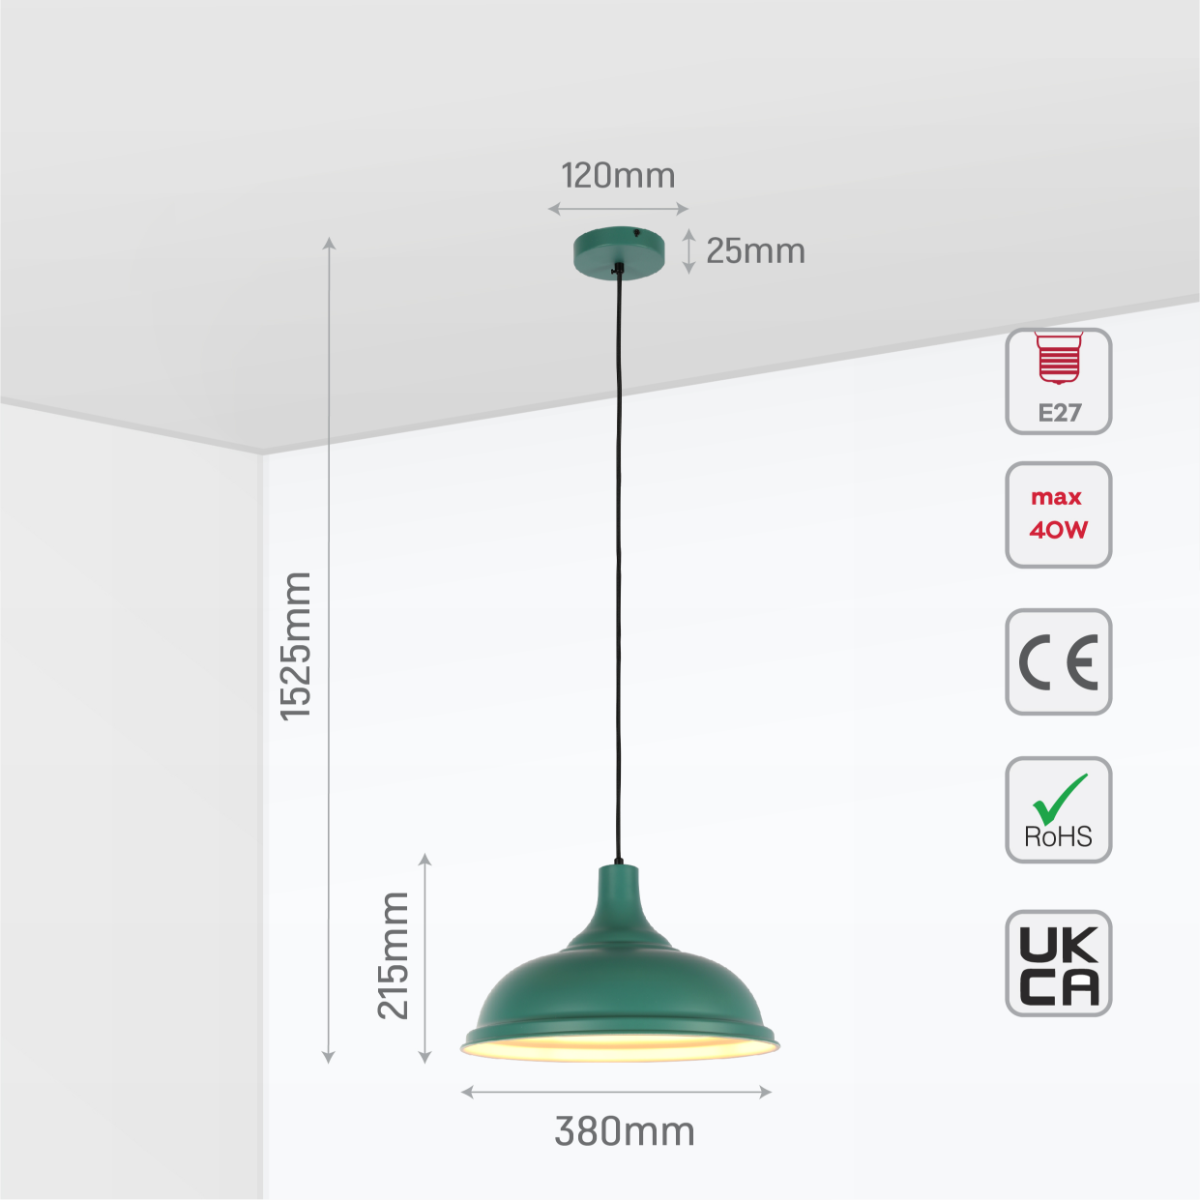 Size and certifications of Modern Step Pendant Light - 38cm Metal Shade in Varied Hues 150-19062